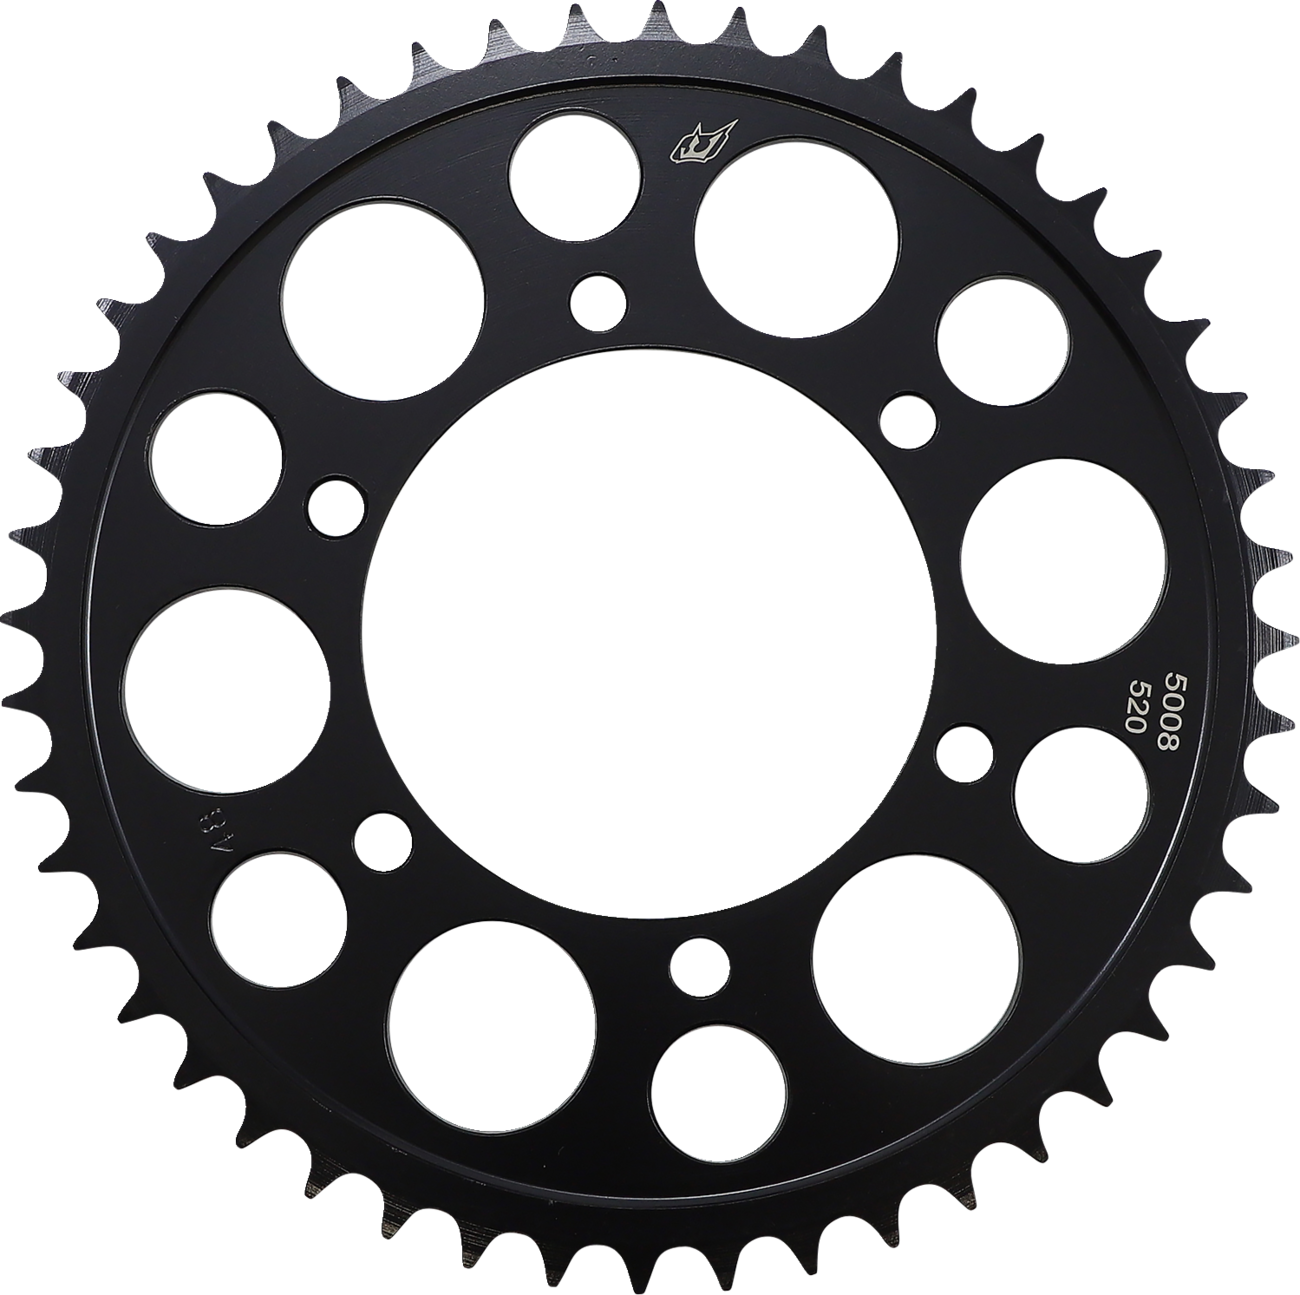 DRIVEN RACING Rear Sprocket - 48 Tooth 5008-520-48T